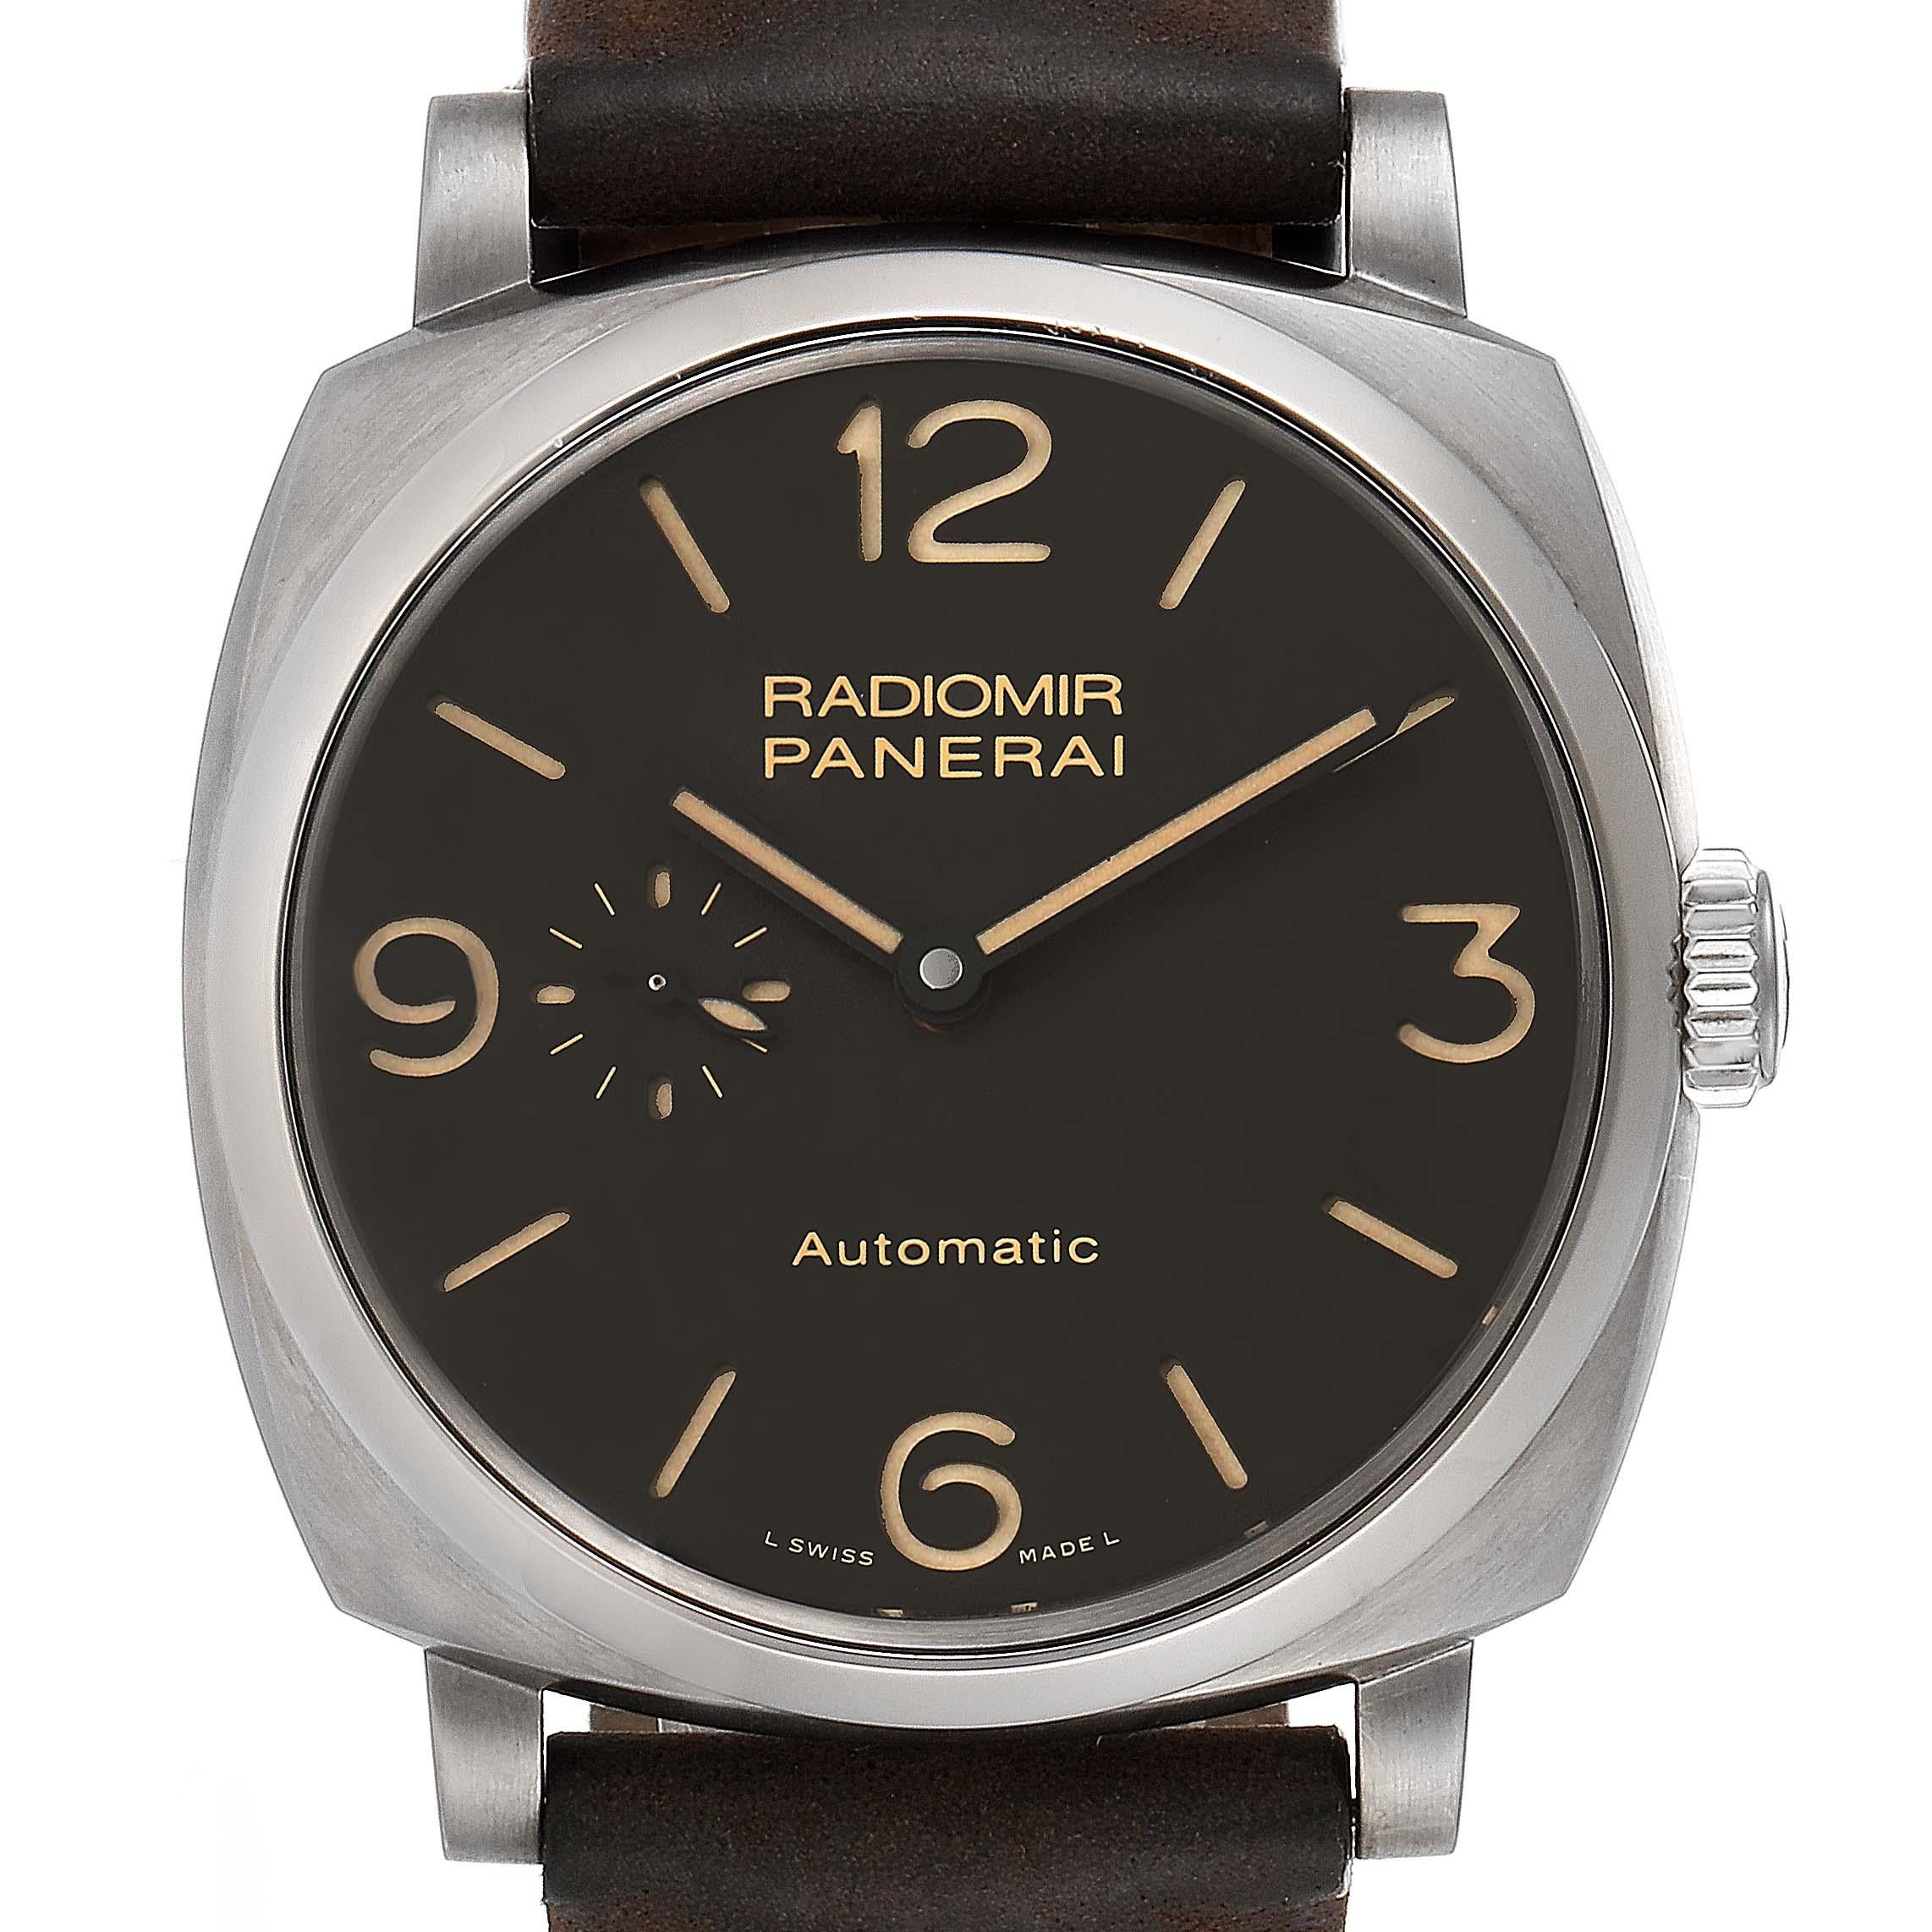 Panerai Radiomir Brown Dial 3 Days 45mm Titanium Watch PAM00619 Box Papers. Automatic self-winding movement. Two part cushion shaped polished titanium case 45.0 mm in diameter. Case thickness 17 mm. Exhibition sapphire crystal caseback. Titanium